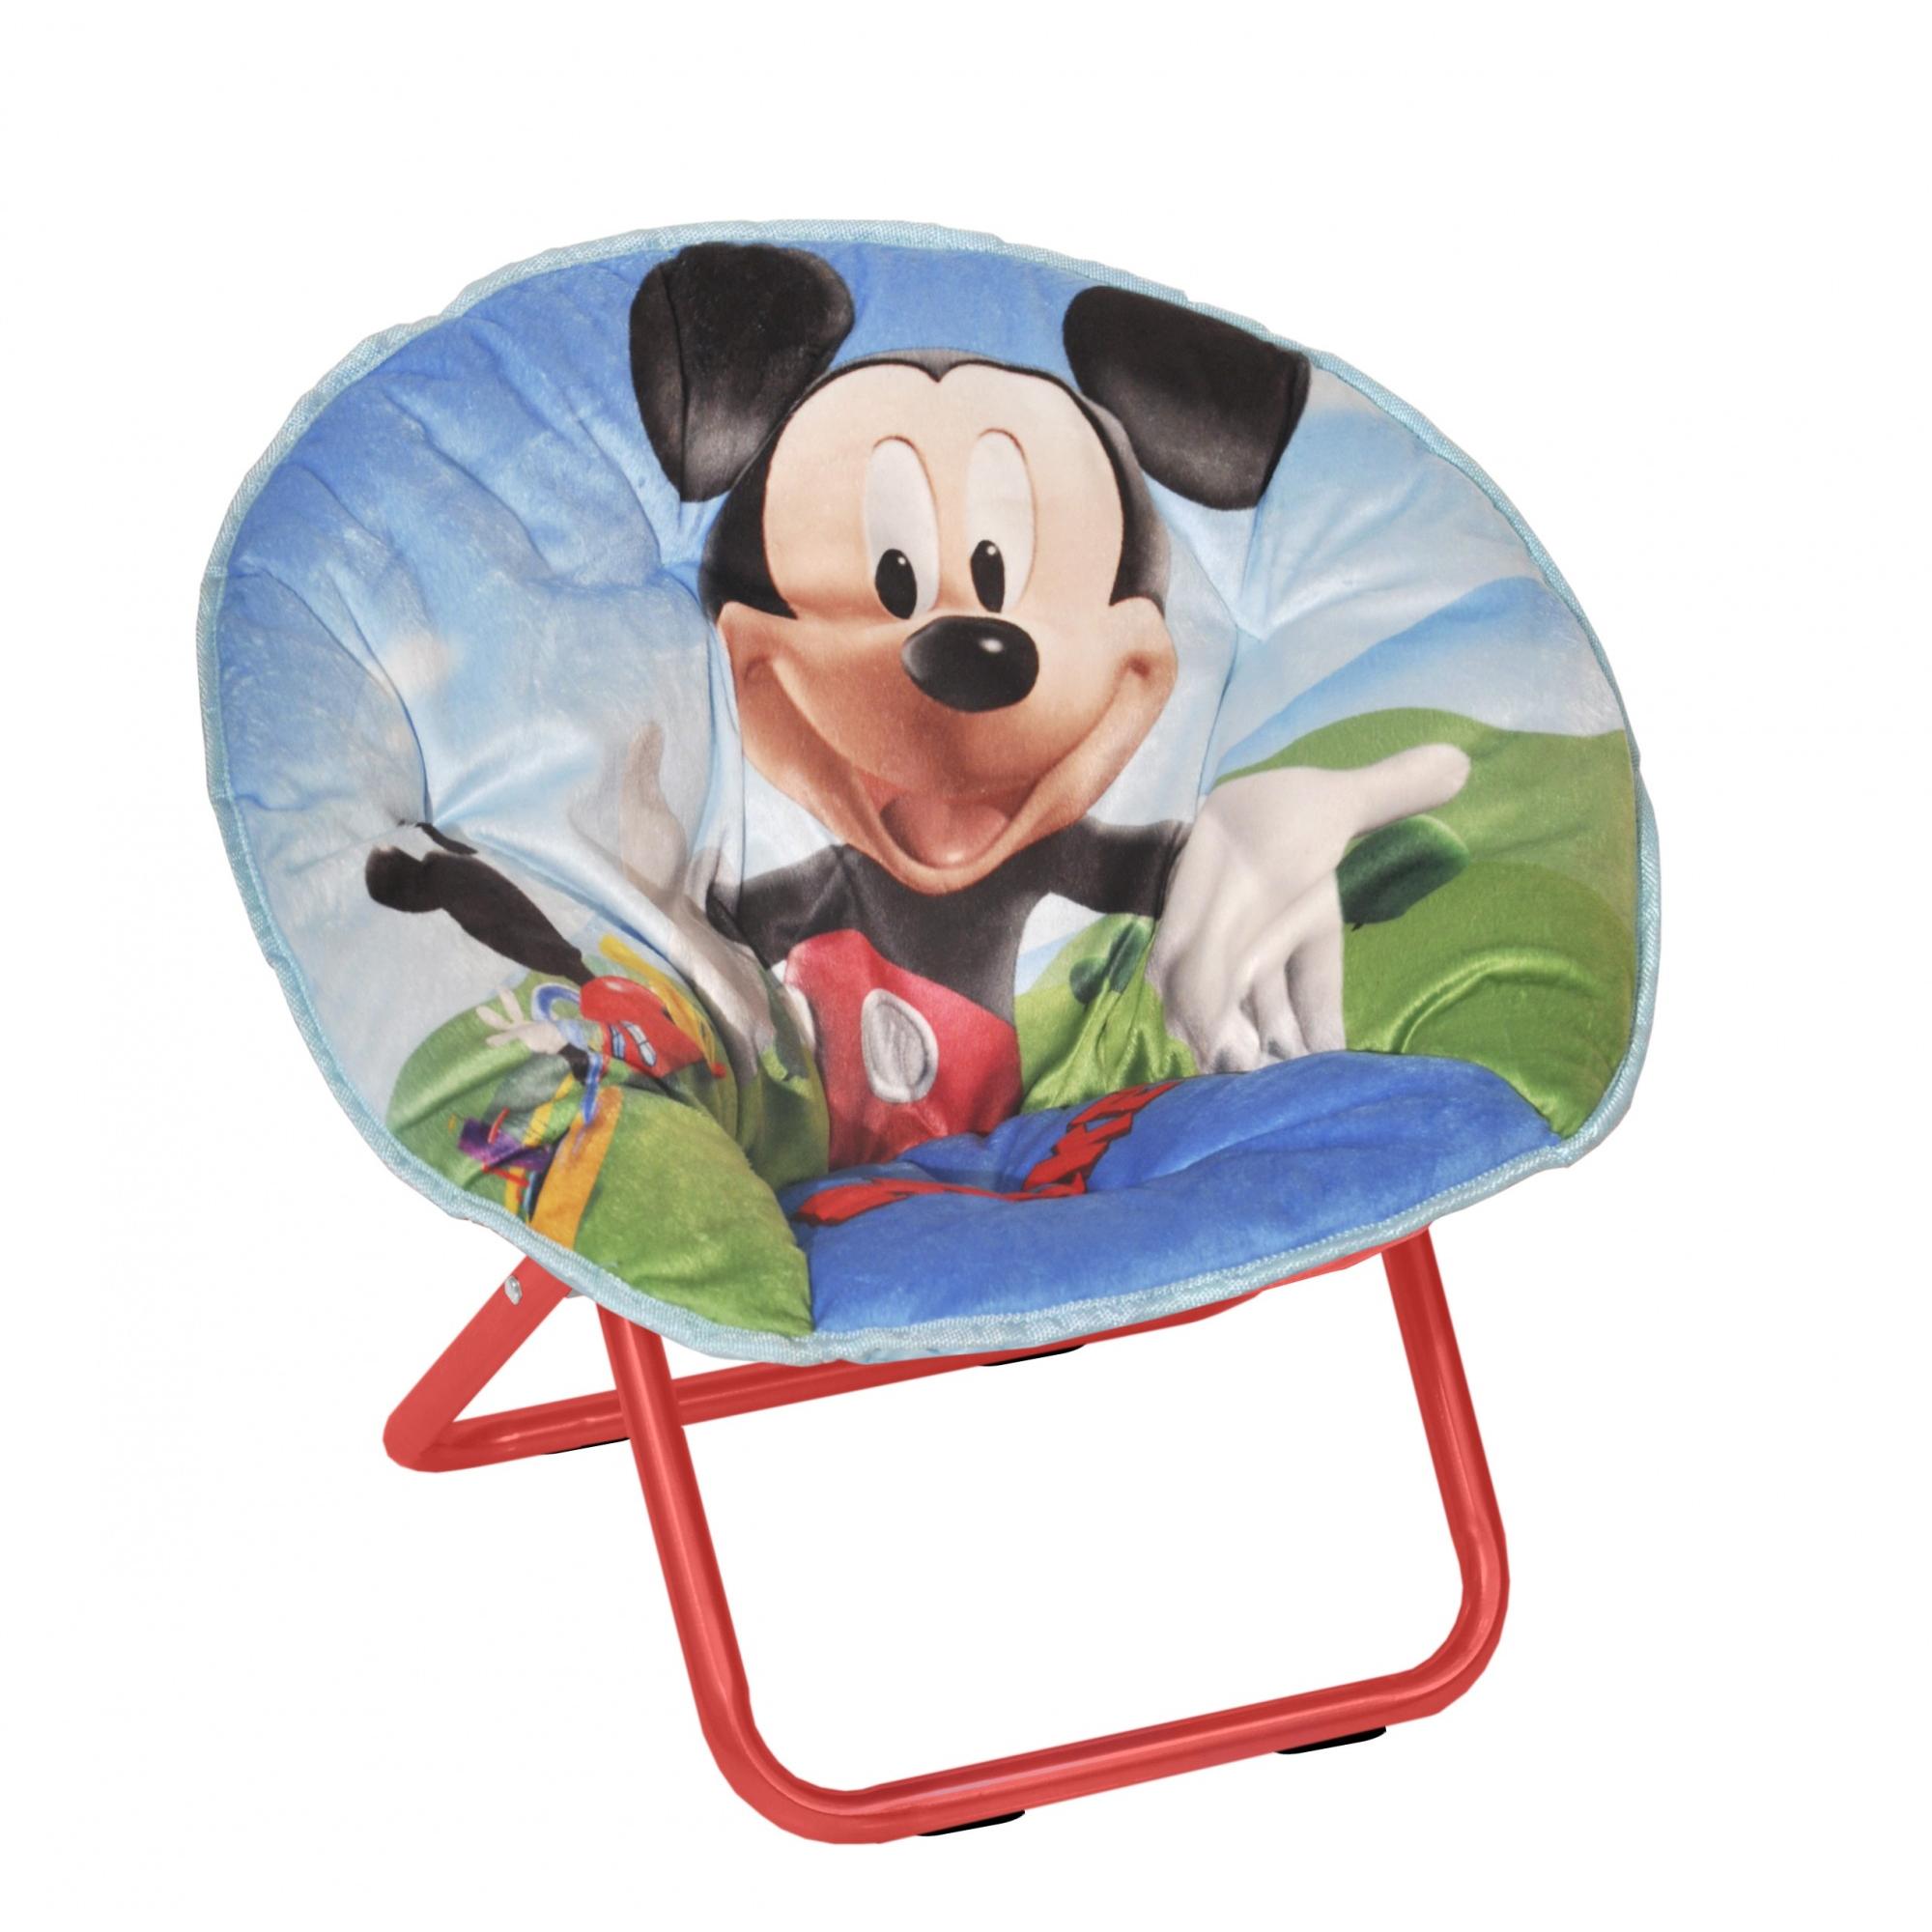 Disney Polyester Folding Chair, Multi-color - image 2 of 4